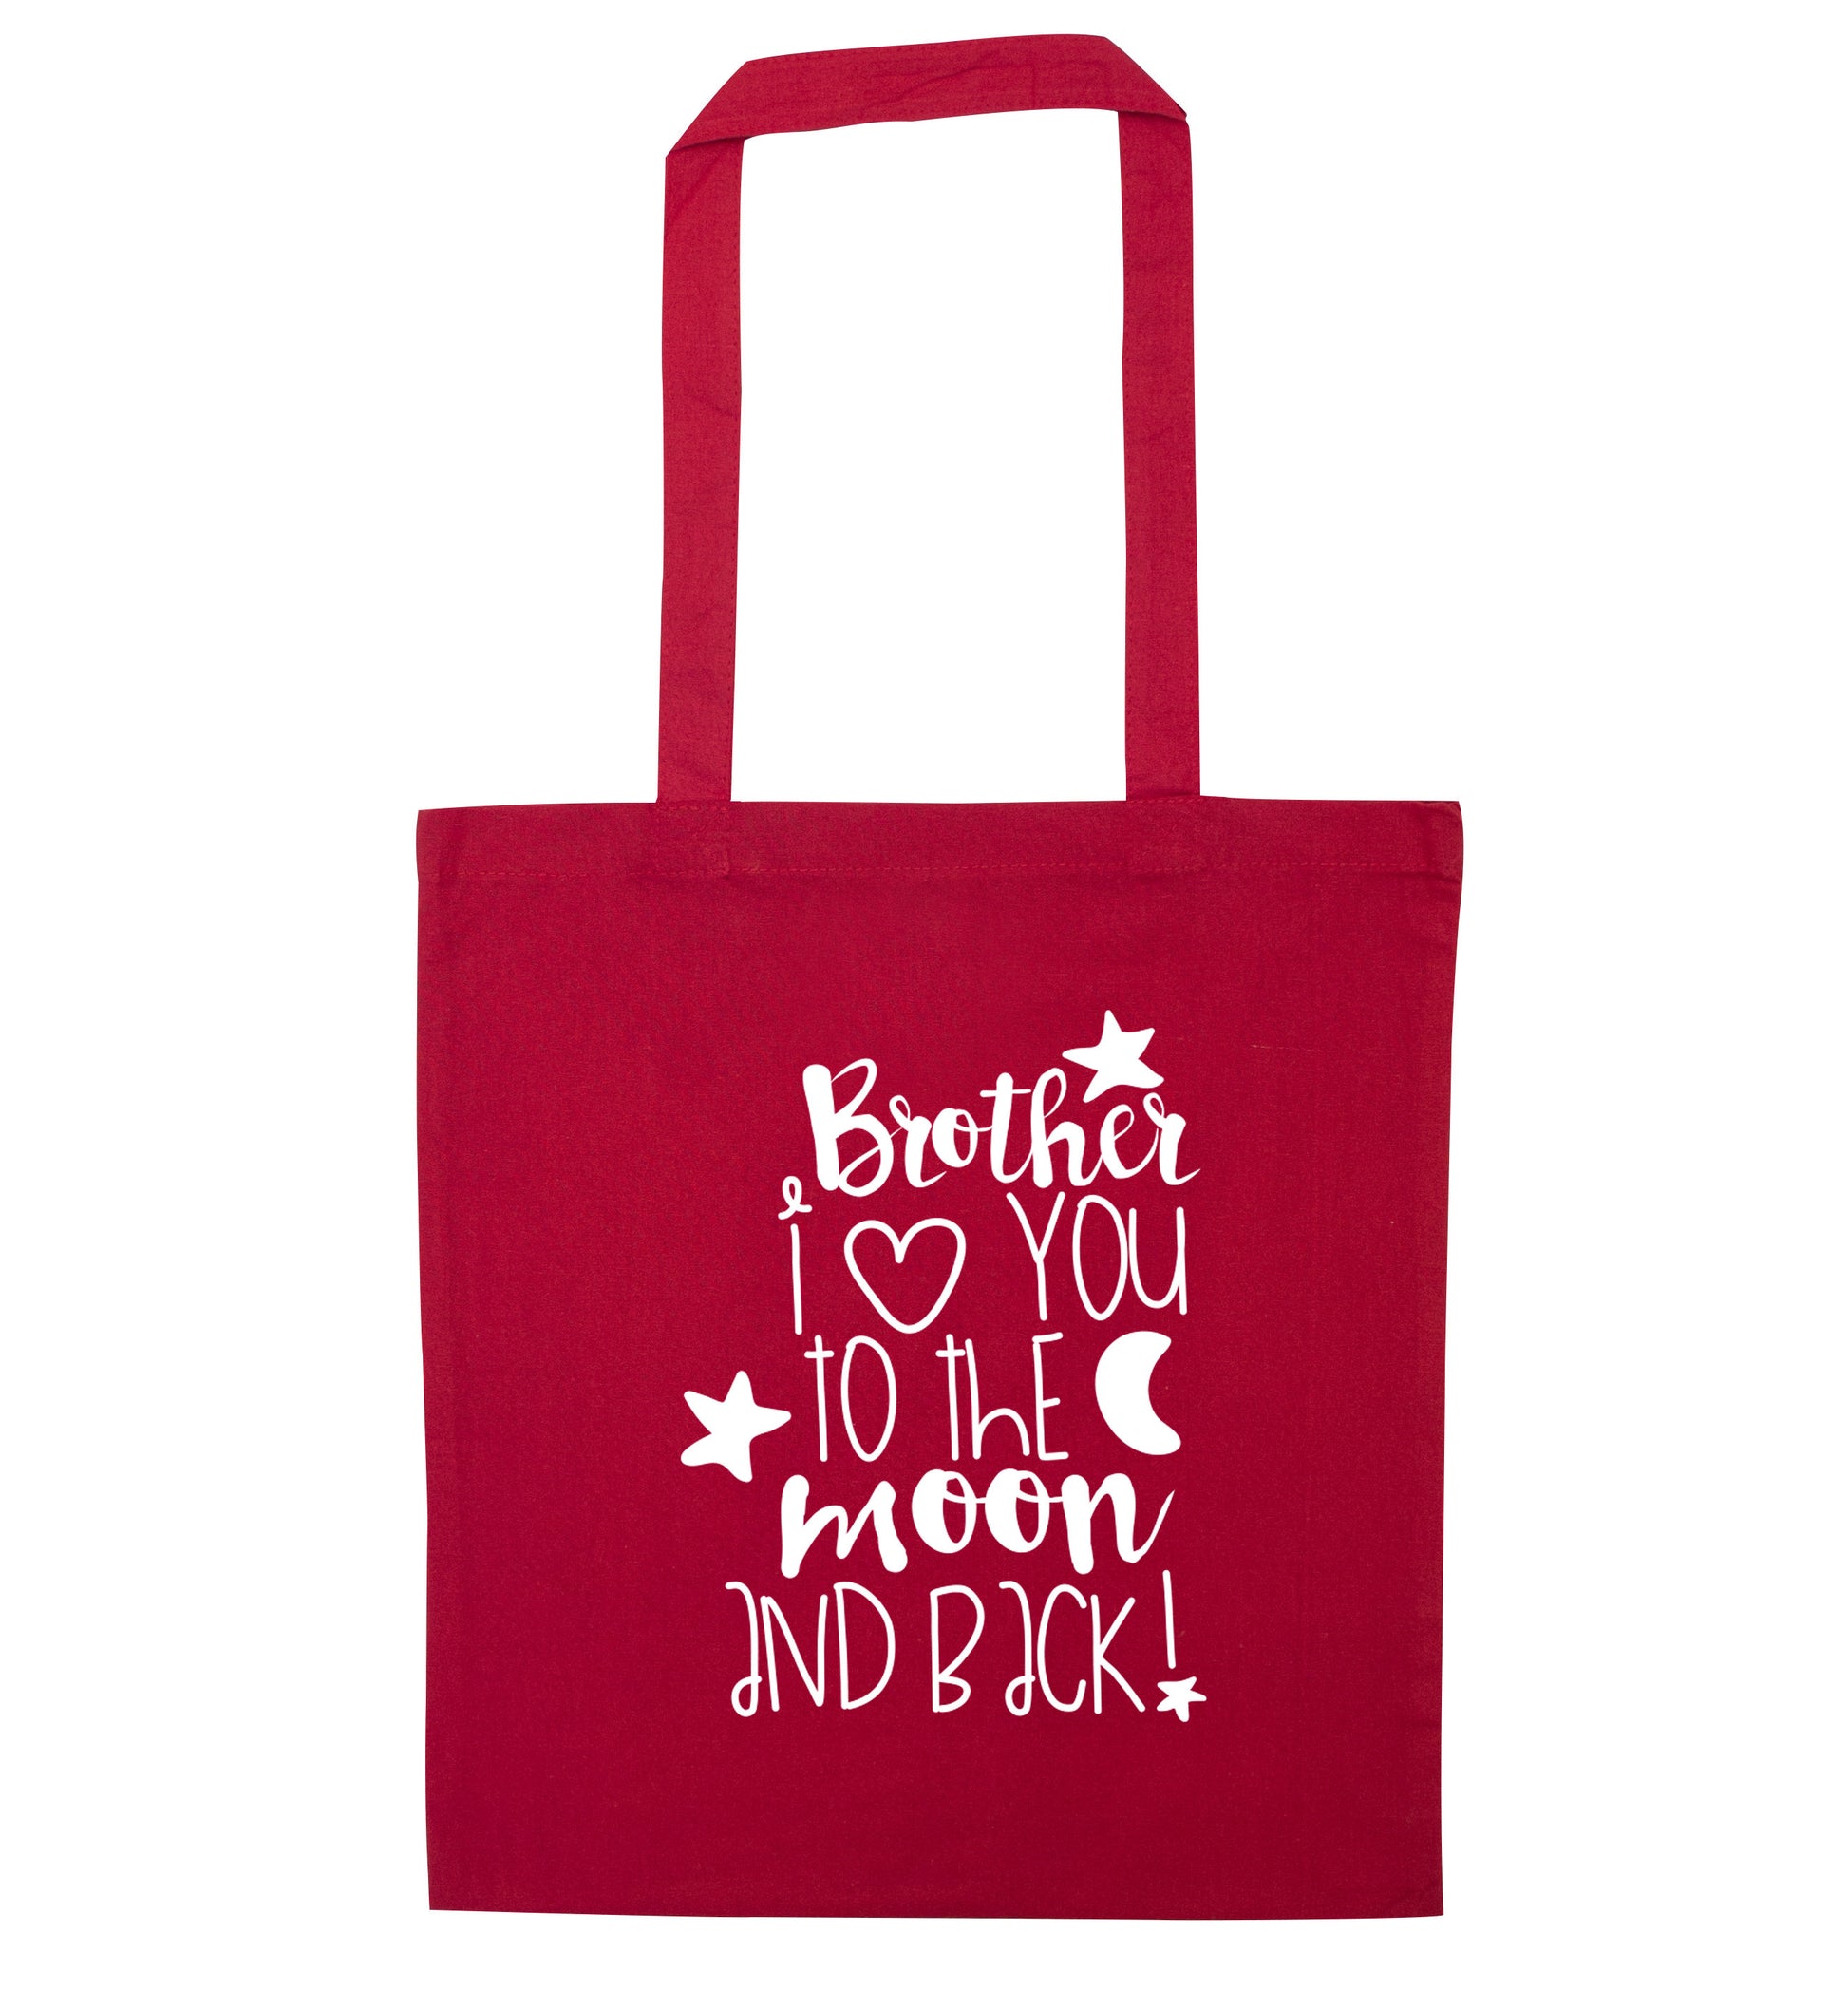 Brother I love you to the moon and back red tote bag